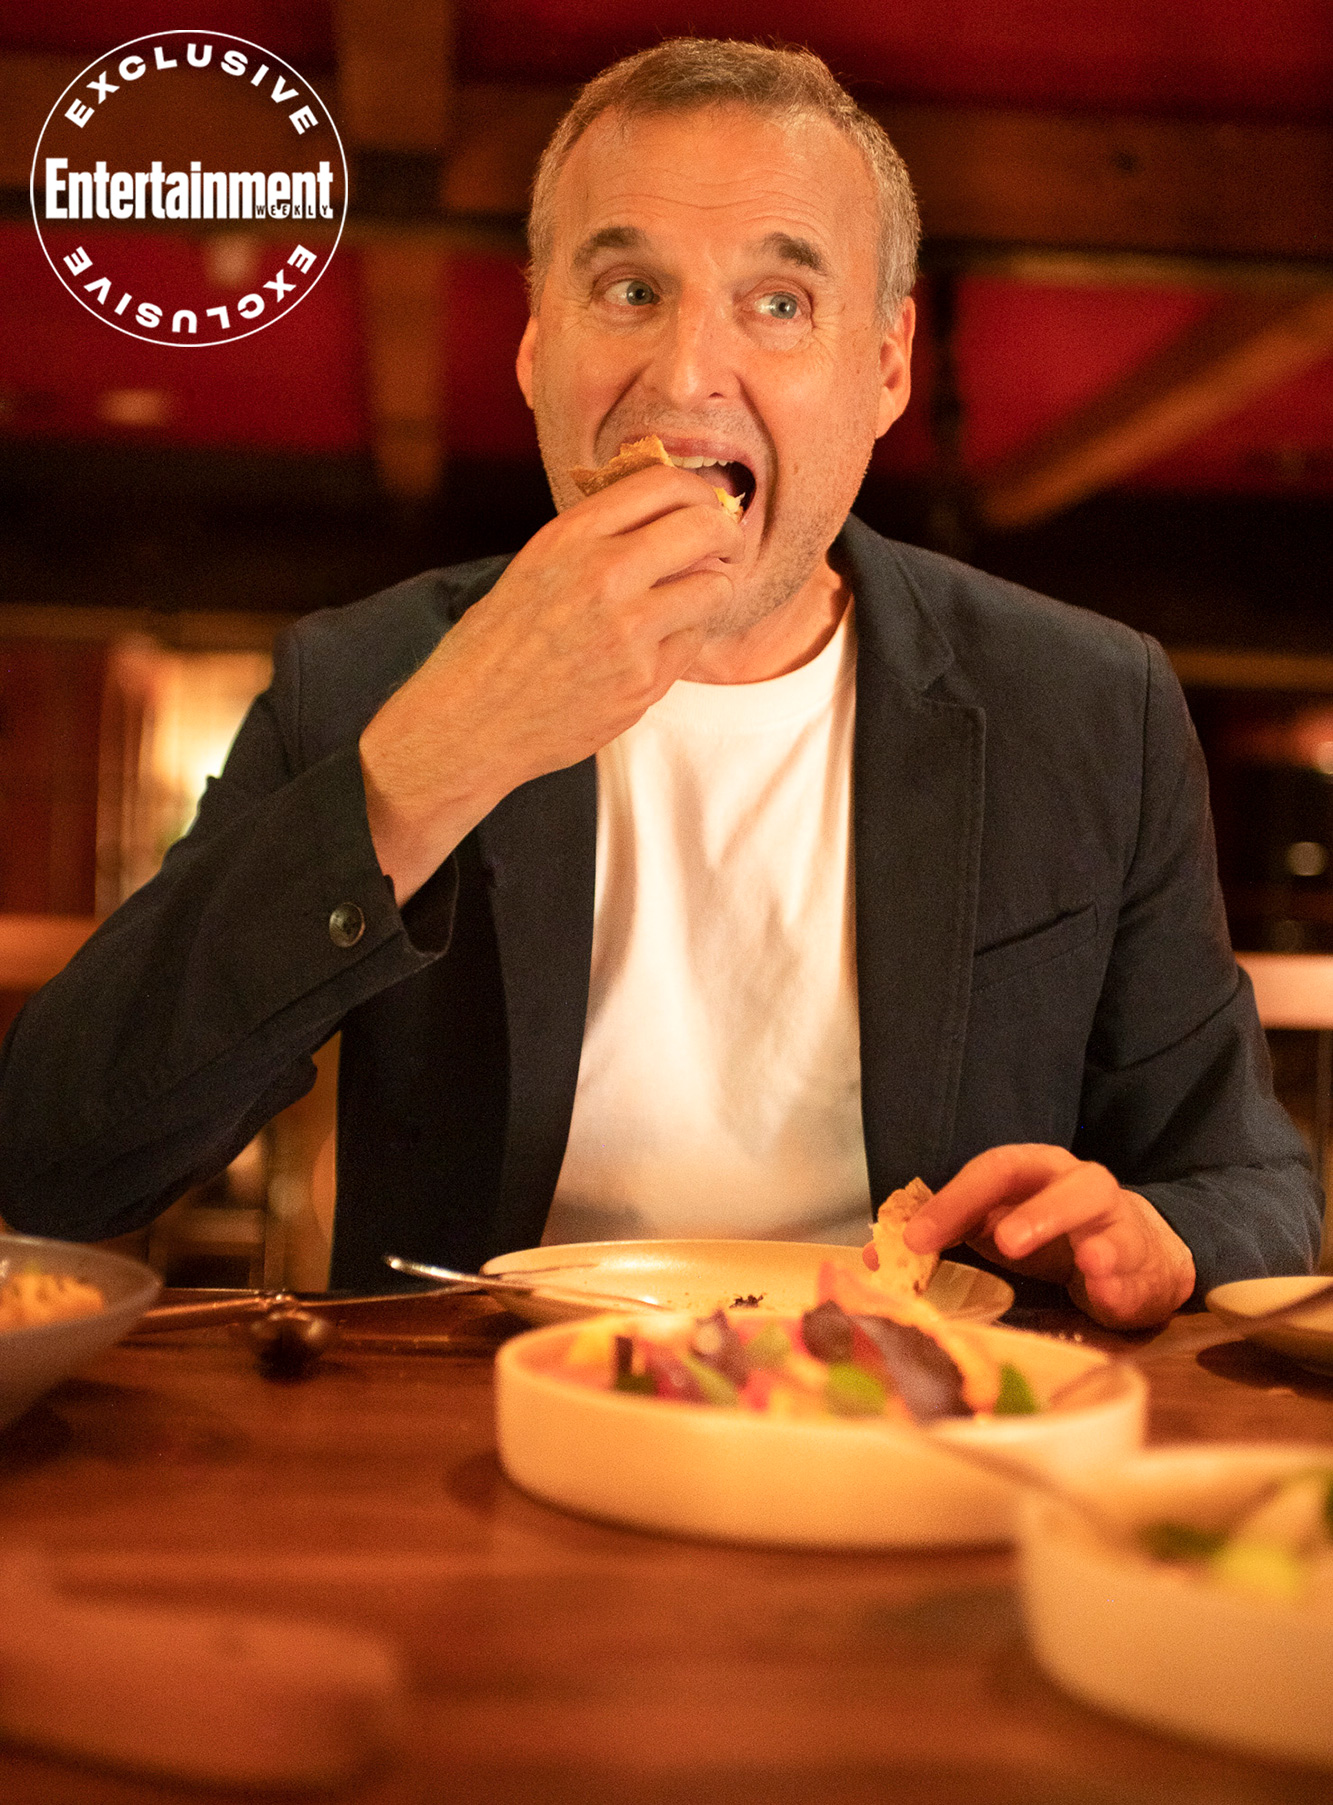 Image of Phil Rosenthal trying some appetizers at Republique restaurant in Los Angeles